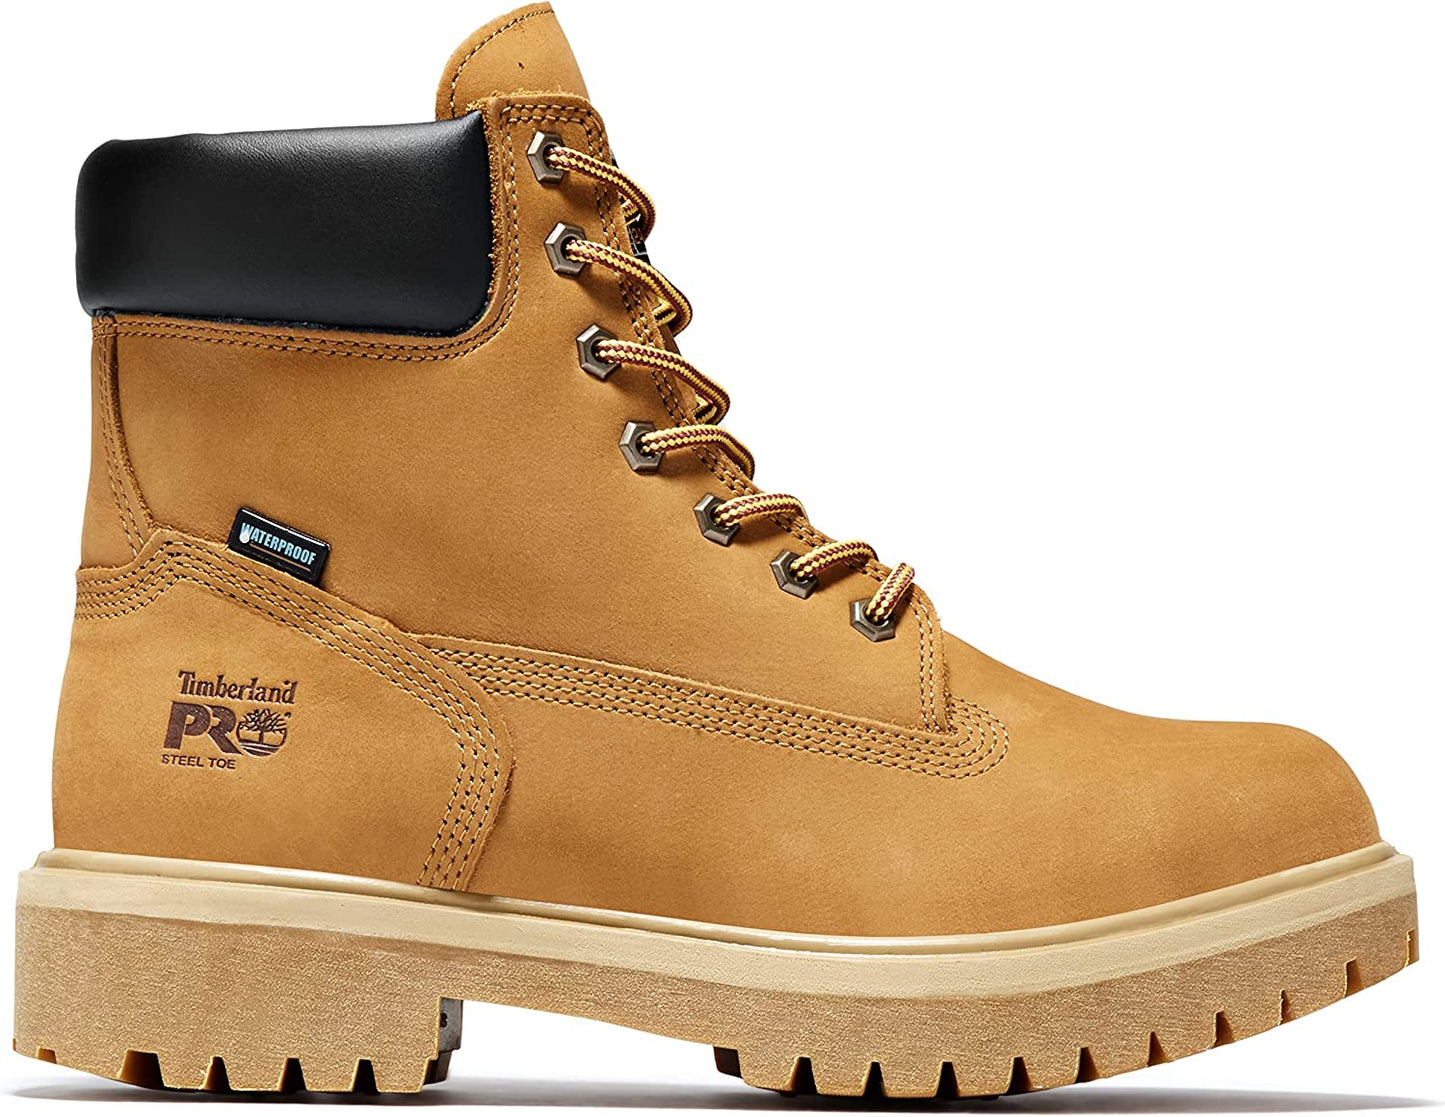 Timberland Men's 6 Inch Basic Waterproof Boots with Padded Collar